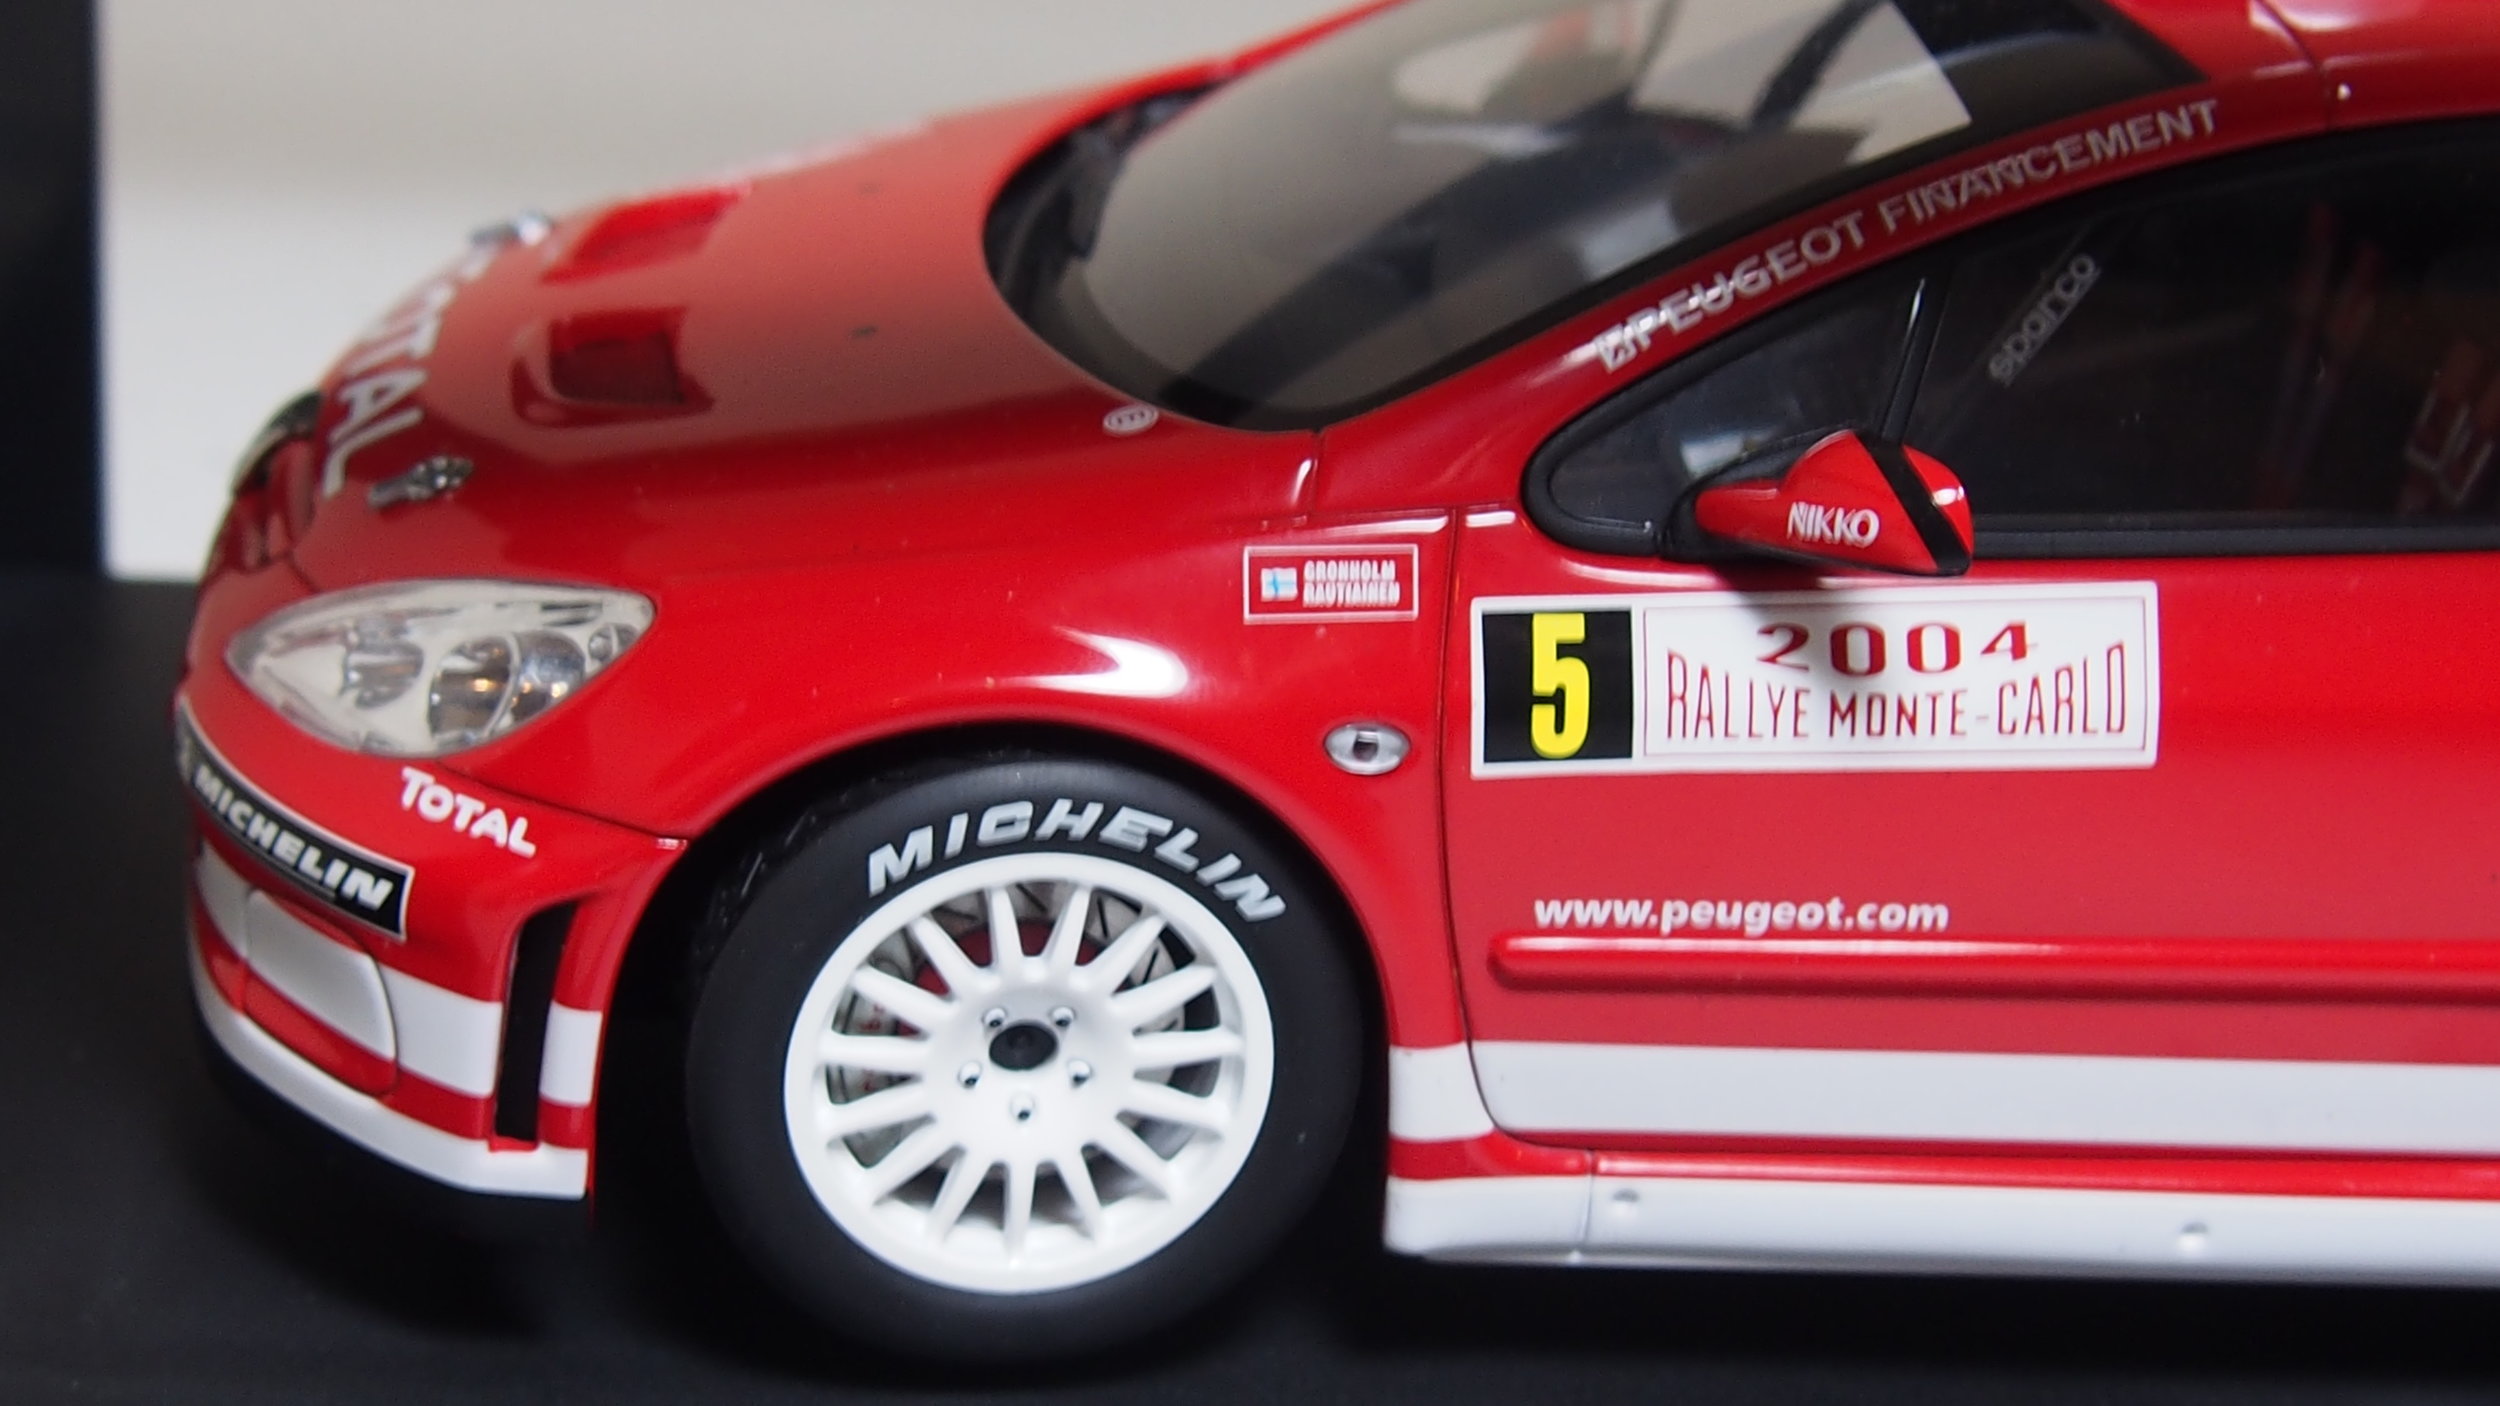 Peugeot 307 WRC various models by AutoArt limited edition 1:18 scale —  CS-DIECAST-TUNING